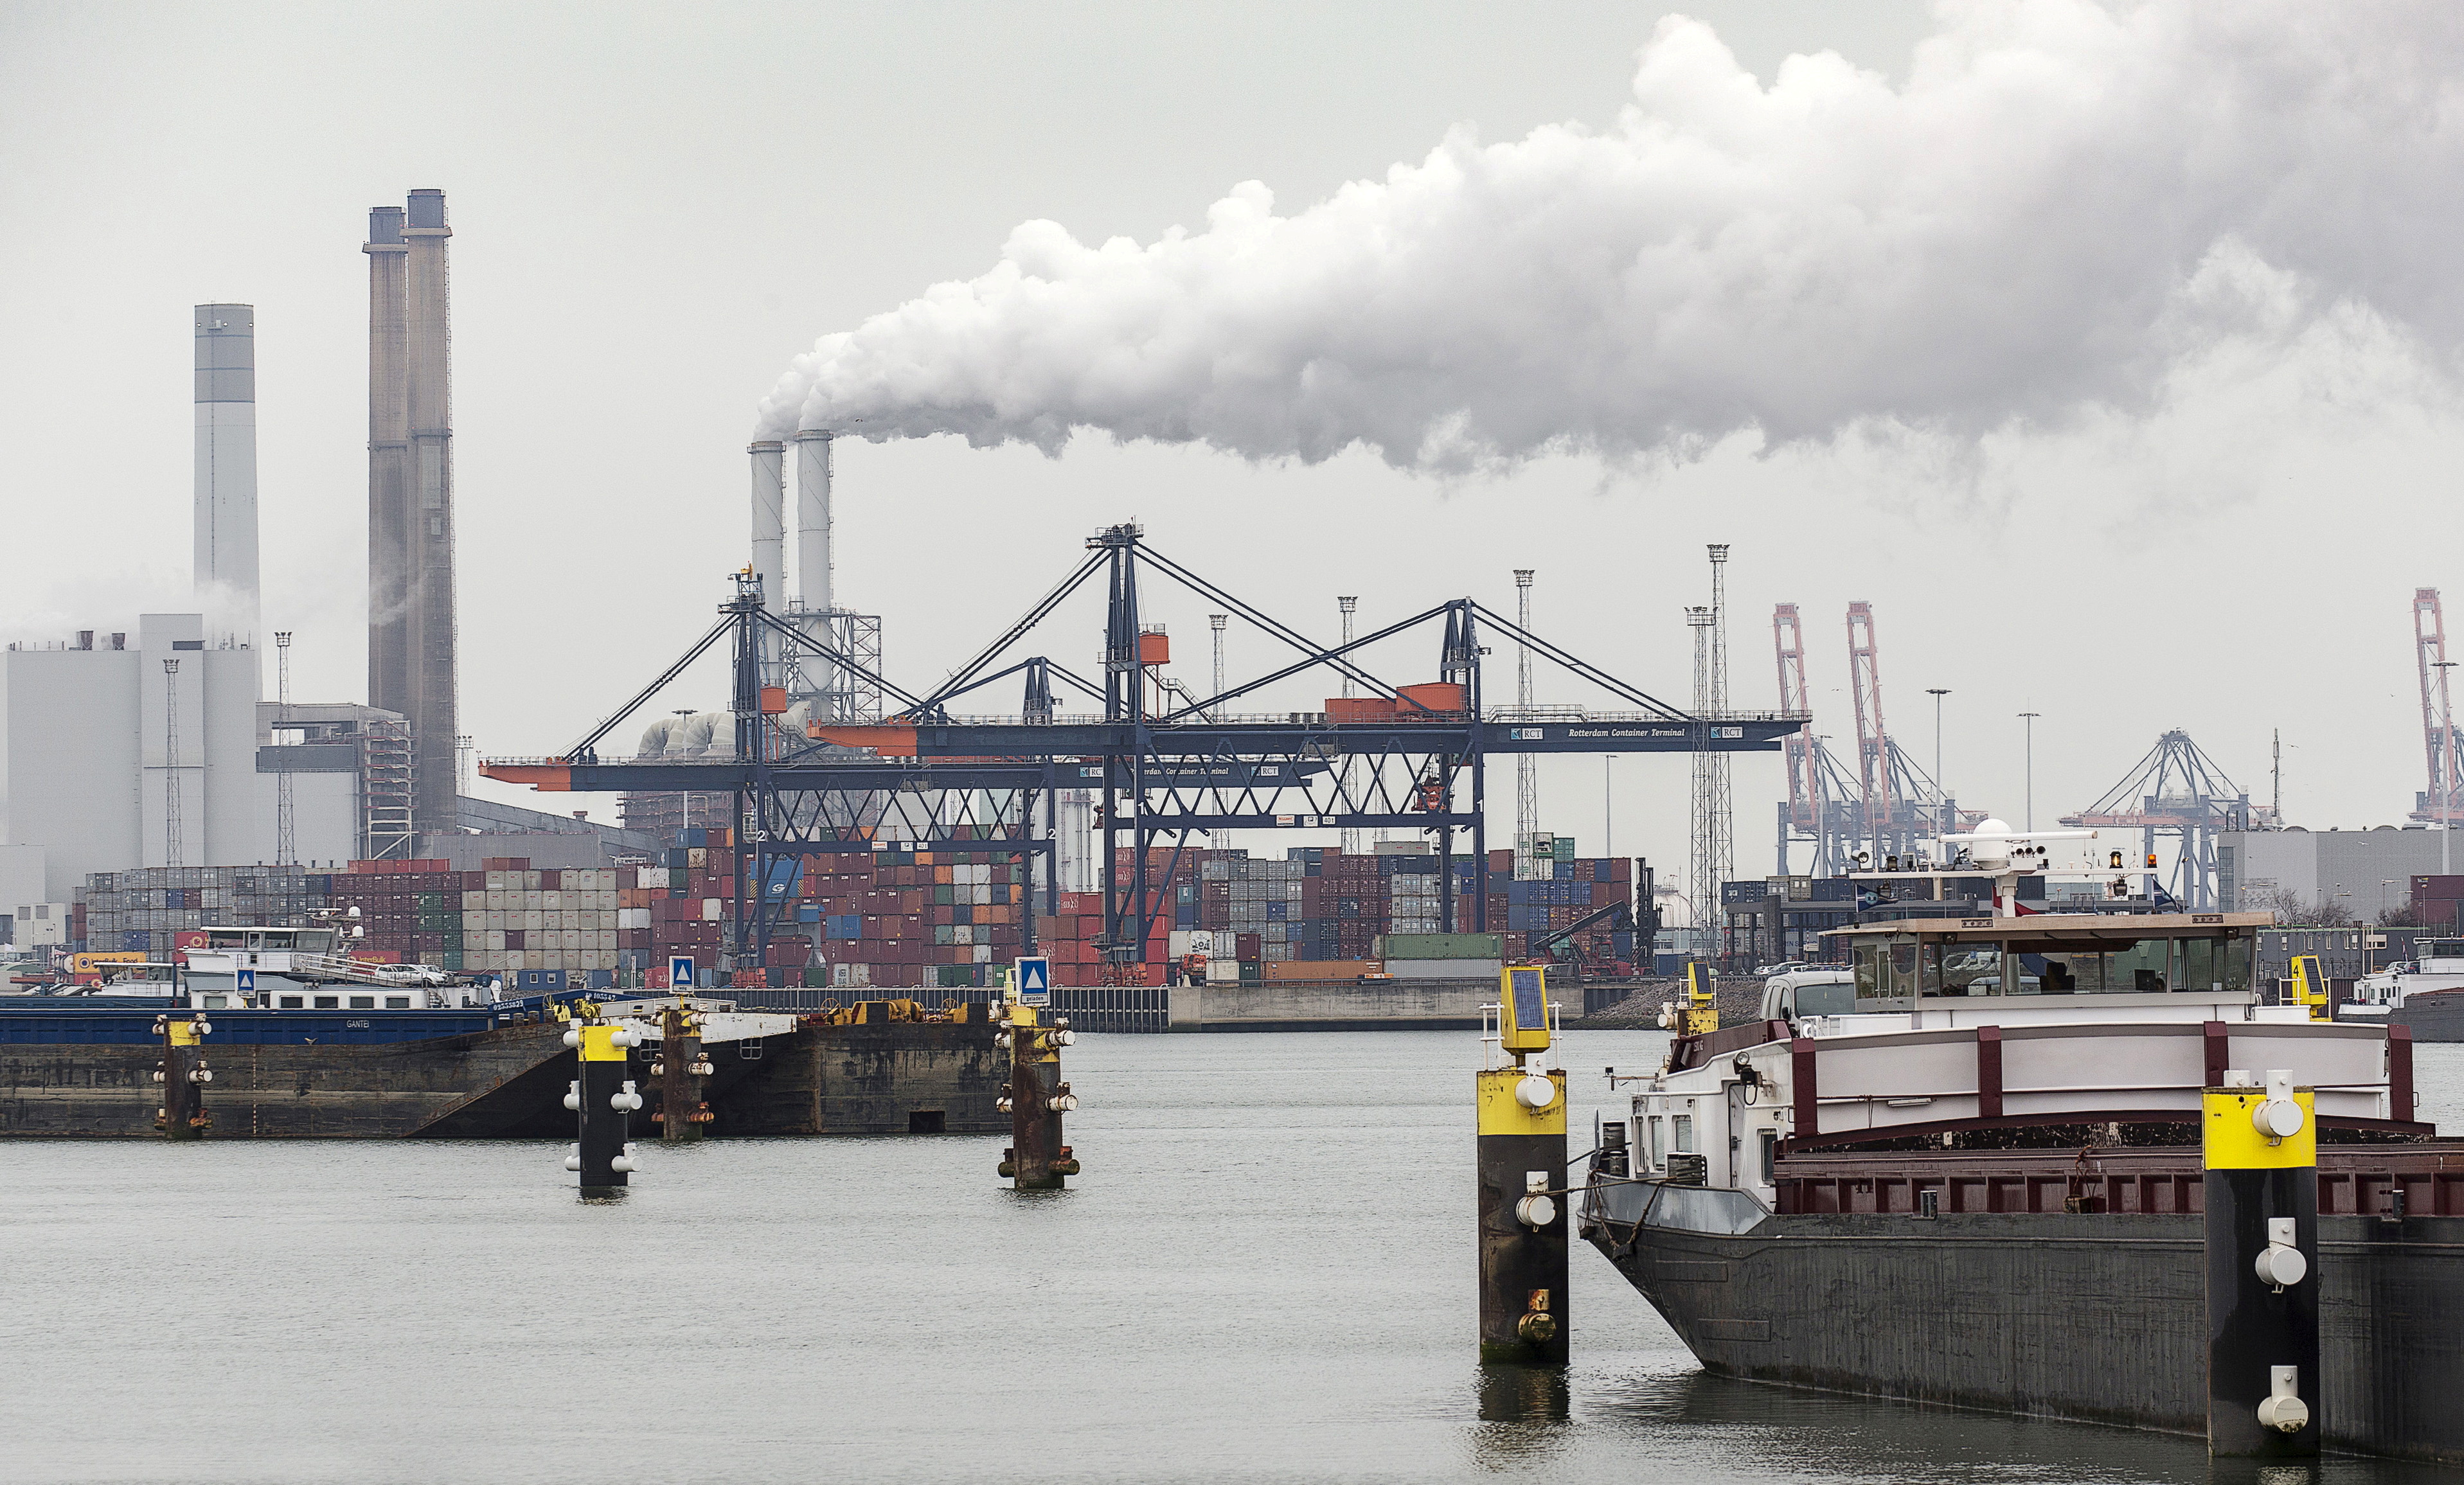 View of a container terminal in the port of Rotterdam